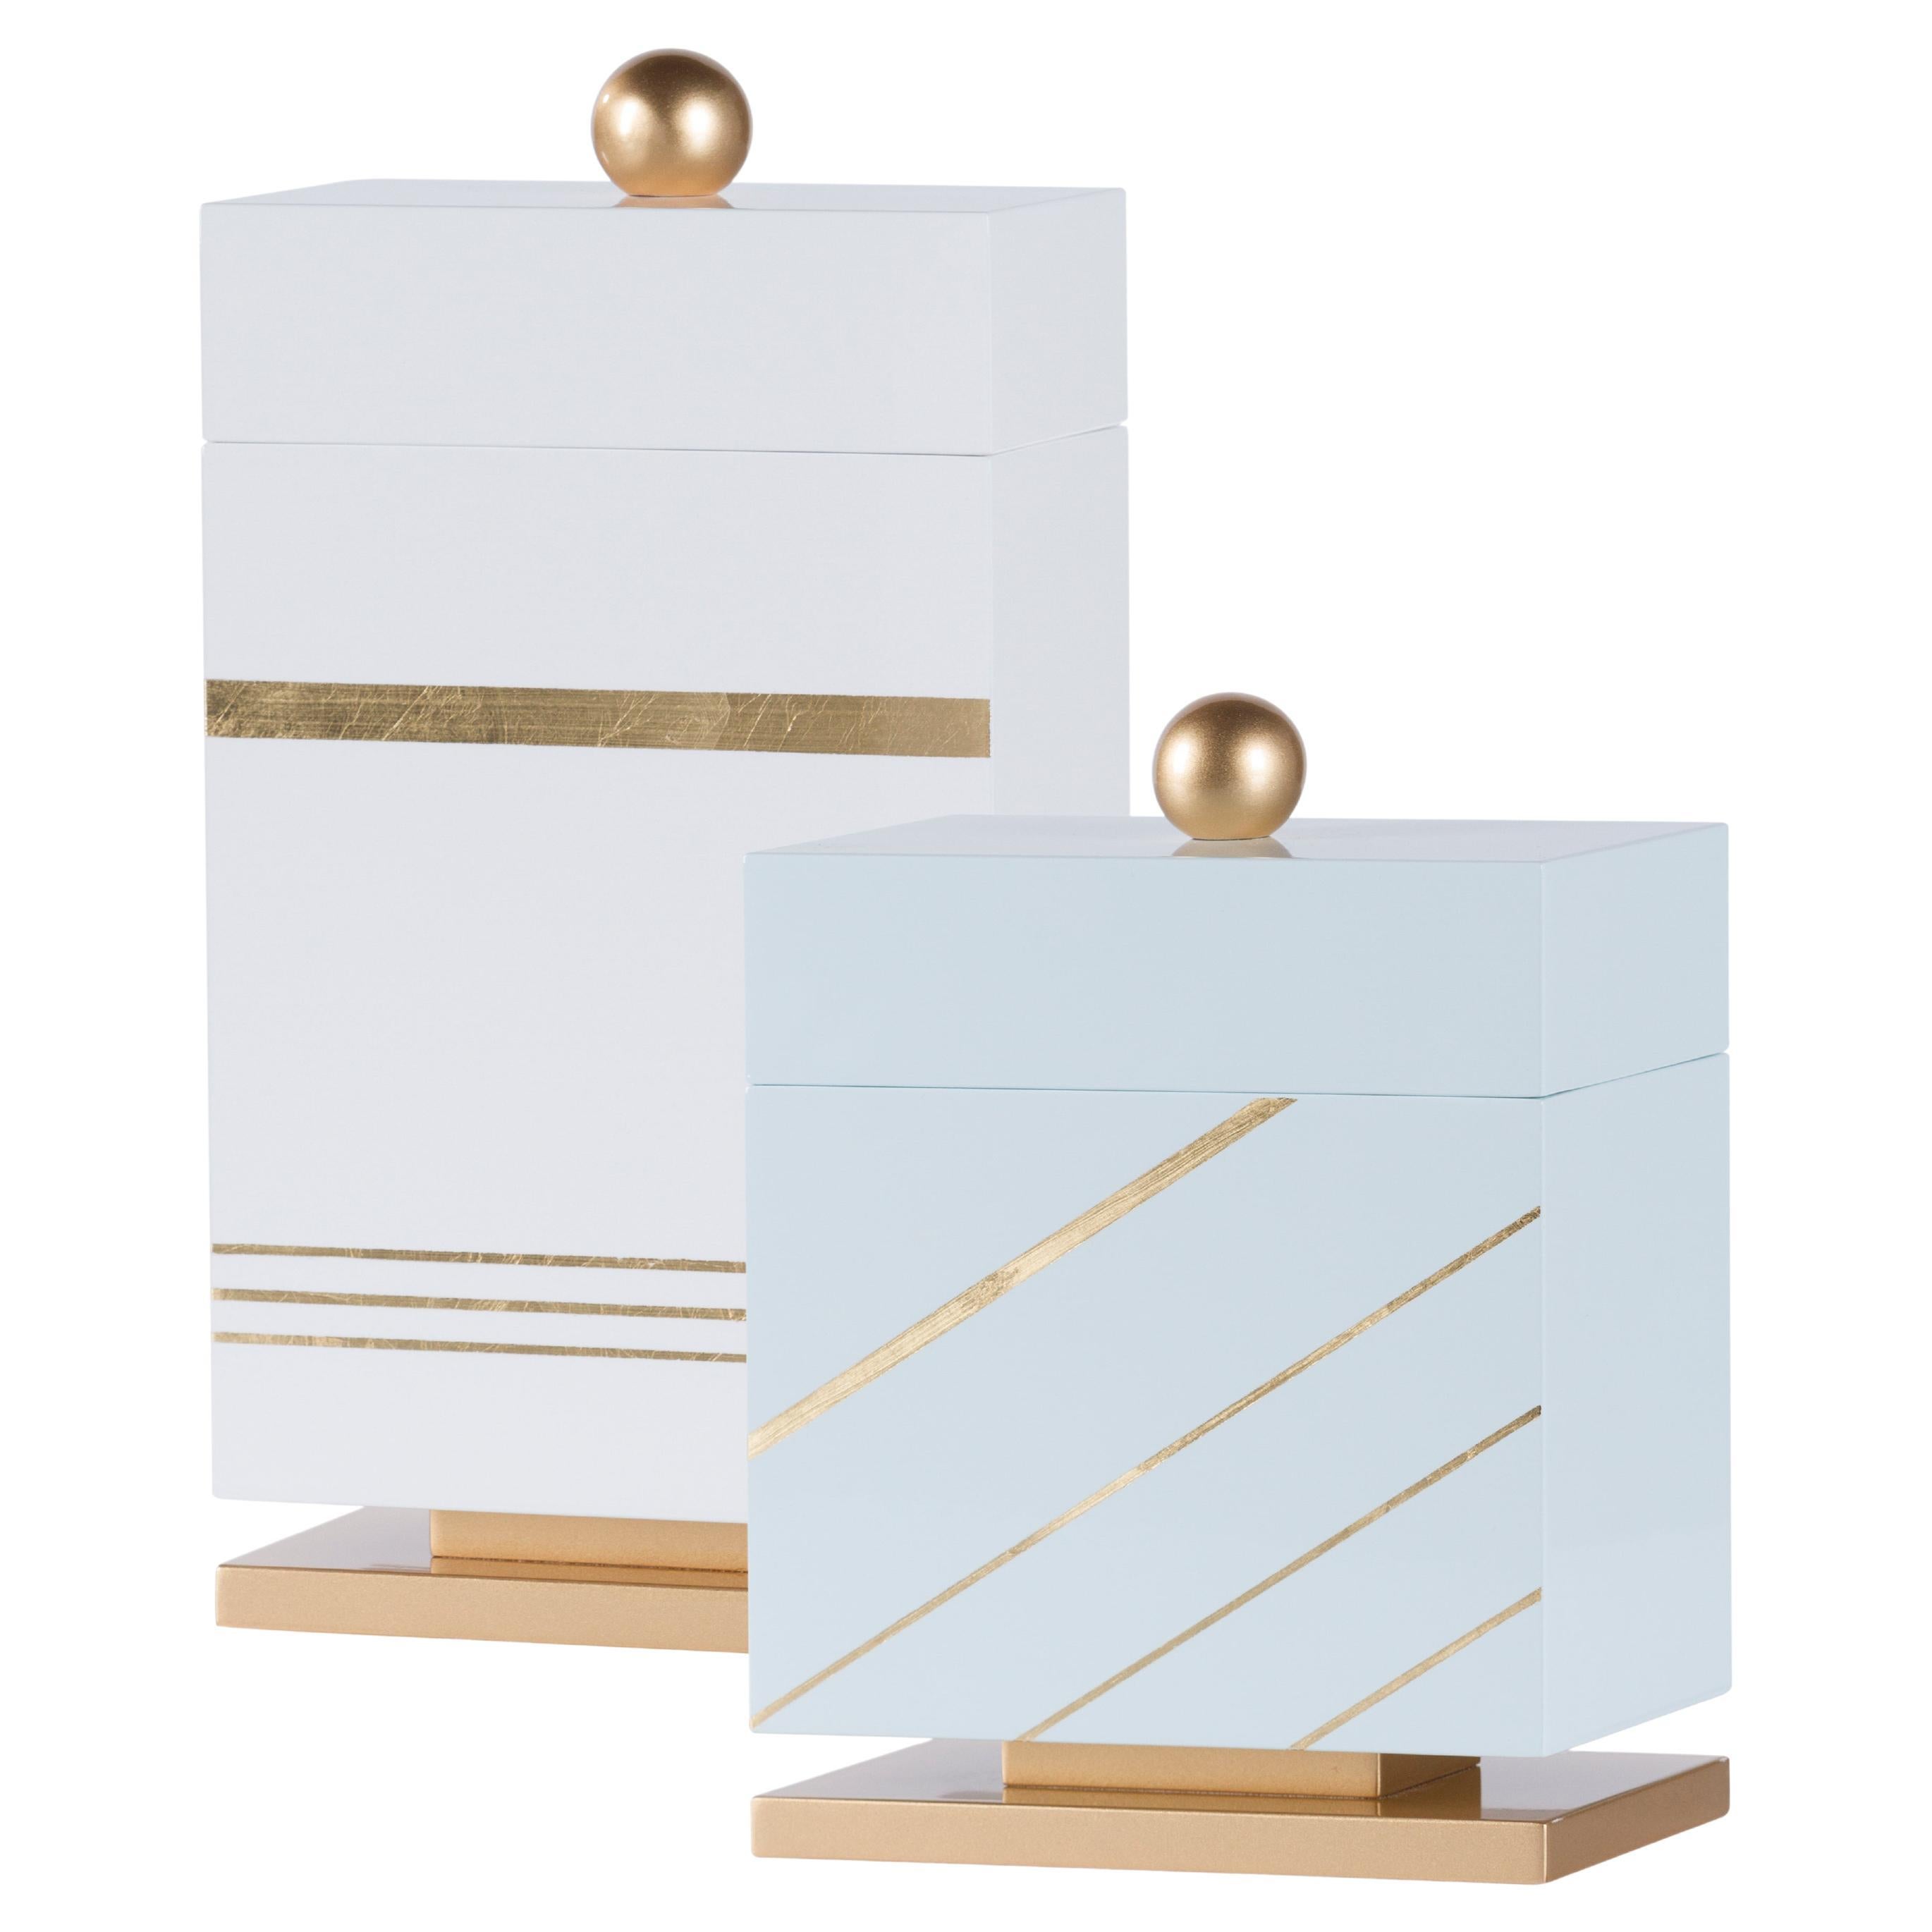 Set/2 Boxes, White and Light-Blue, Handmade in Portugal by Lusitanus Home